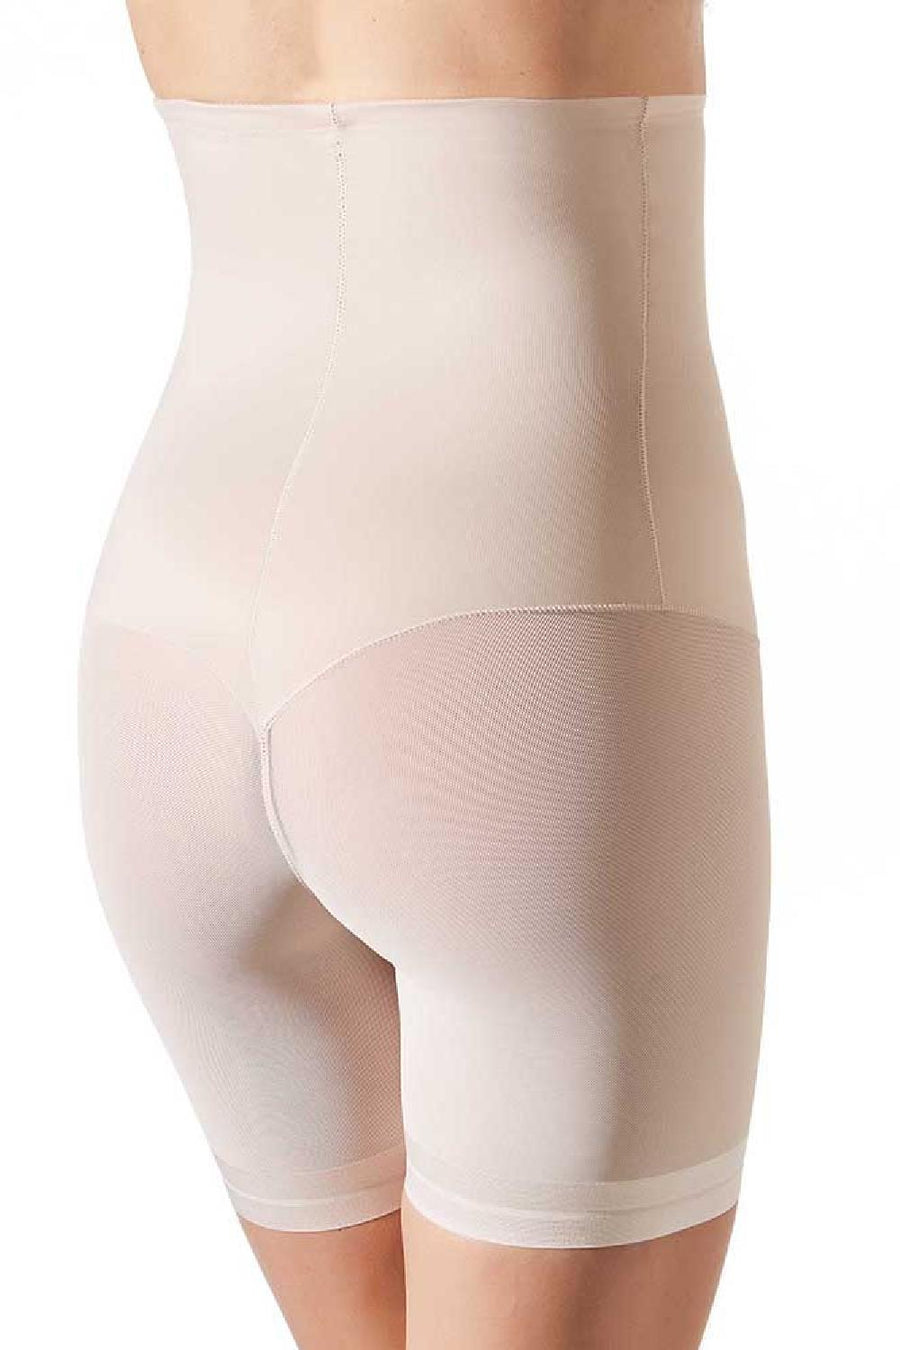 DELIMIRA Women's Shapewear Shorts Tummy Control Plus Size High Waisted  Panties High Compression Thigh Slimmer Beige Small at  Women's  Clothing store